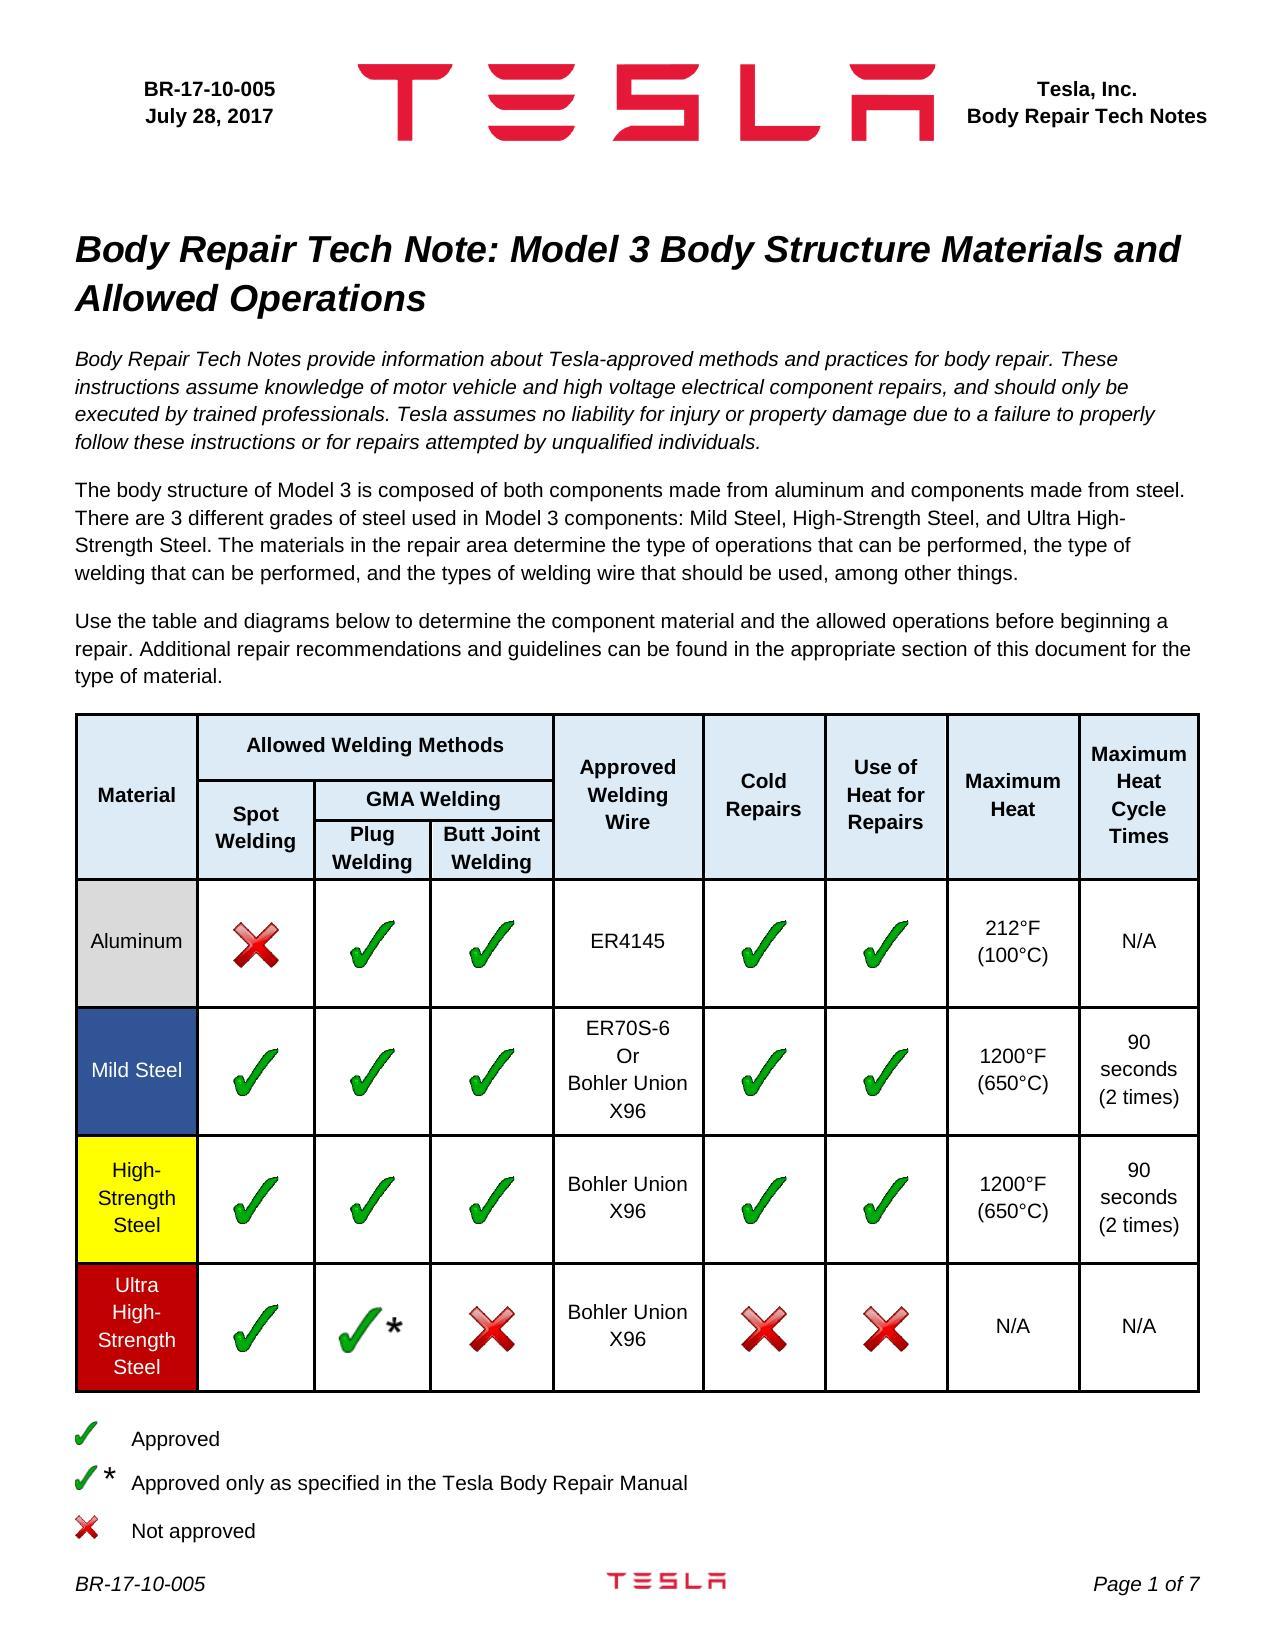 tesla-body-repair-tech-notes-model-3-body-structure-materials-and-allowed-operations.pdf